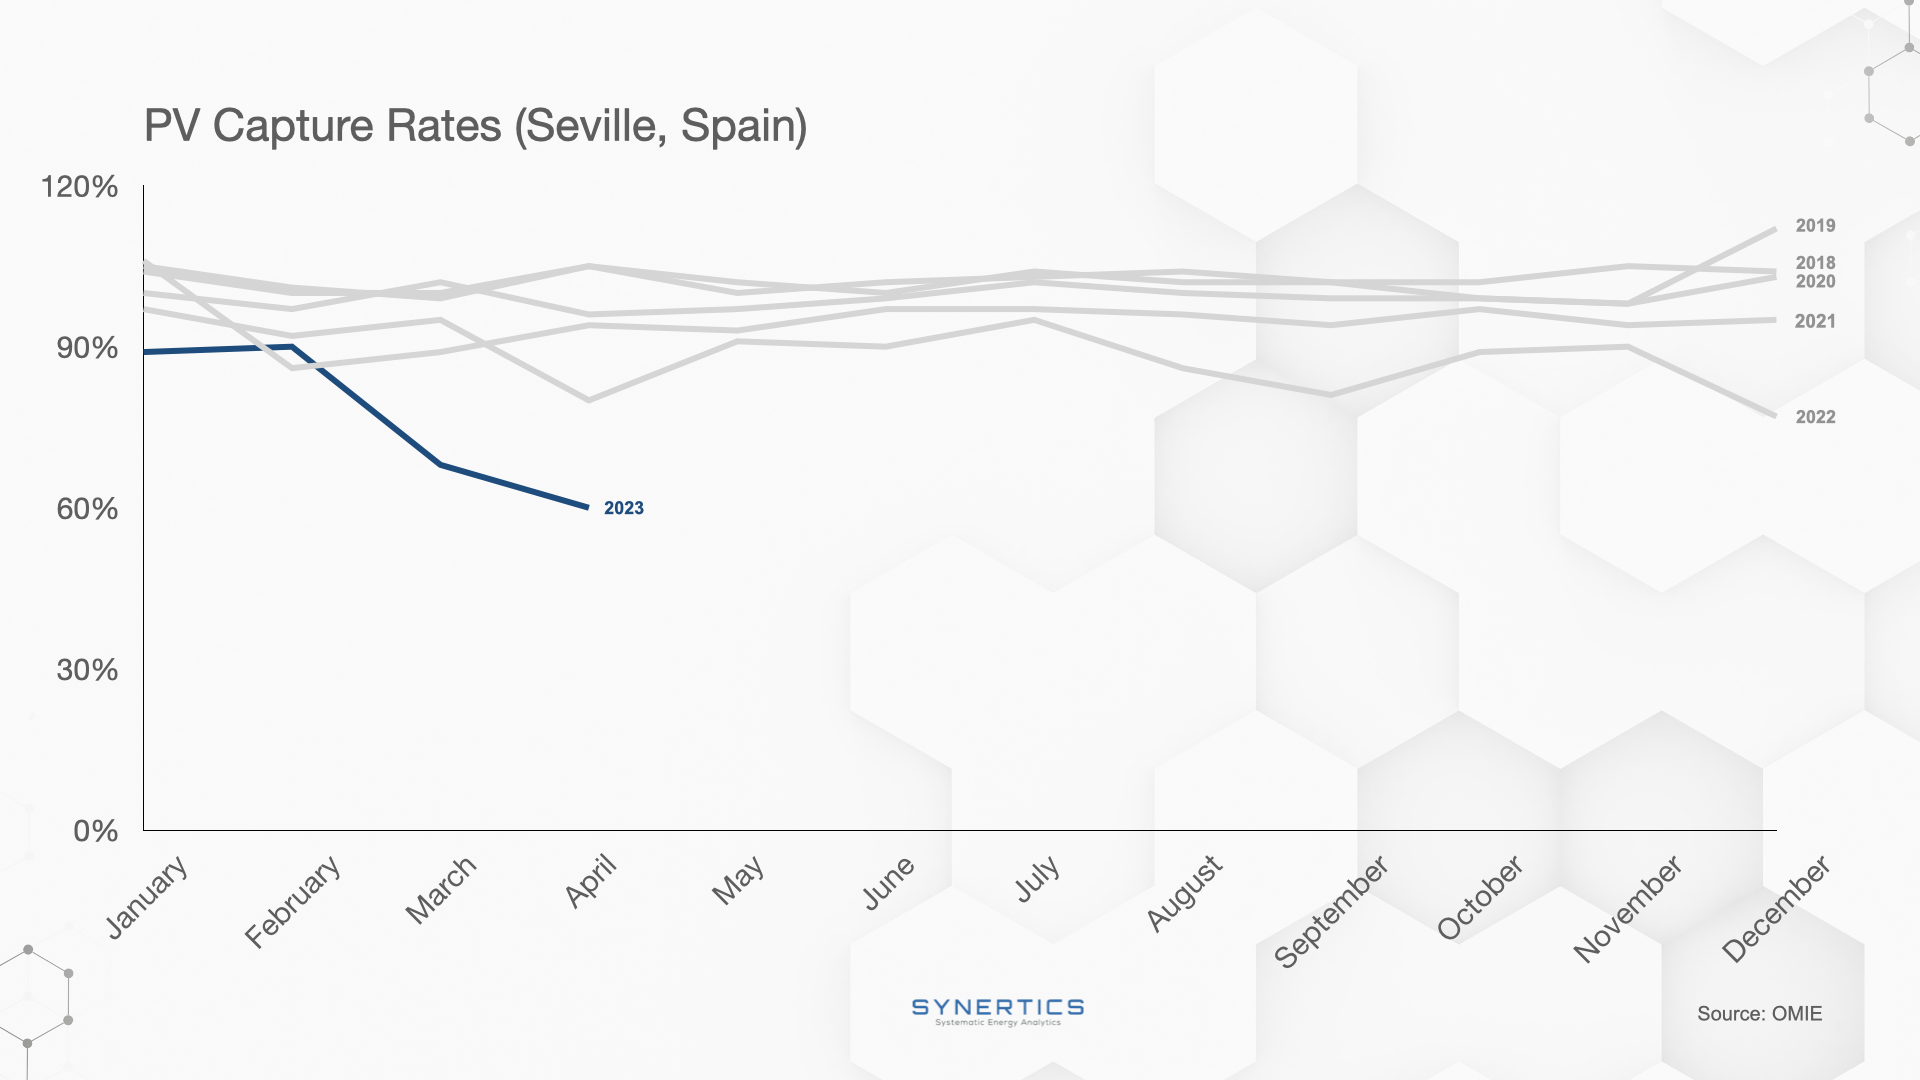 PV Capture Rates in Spain over the years